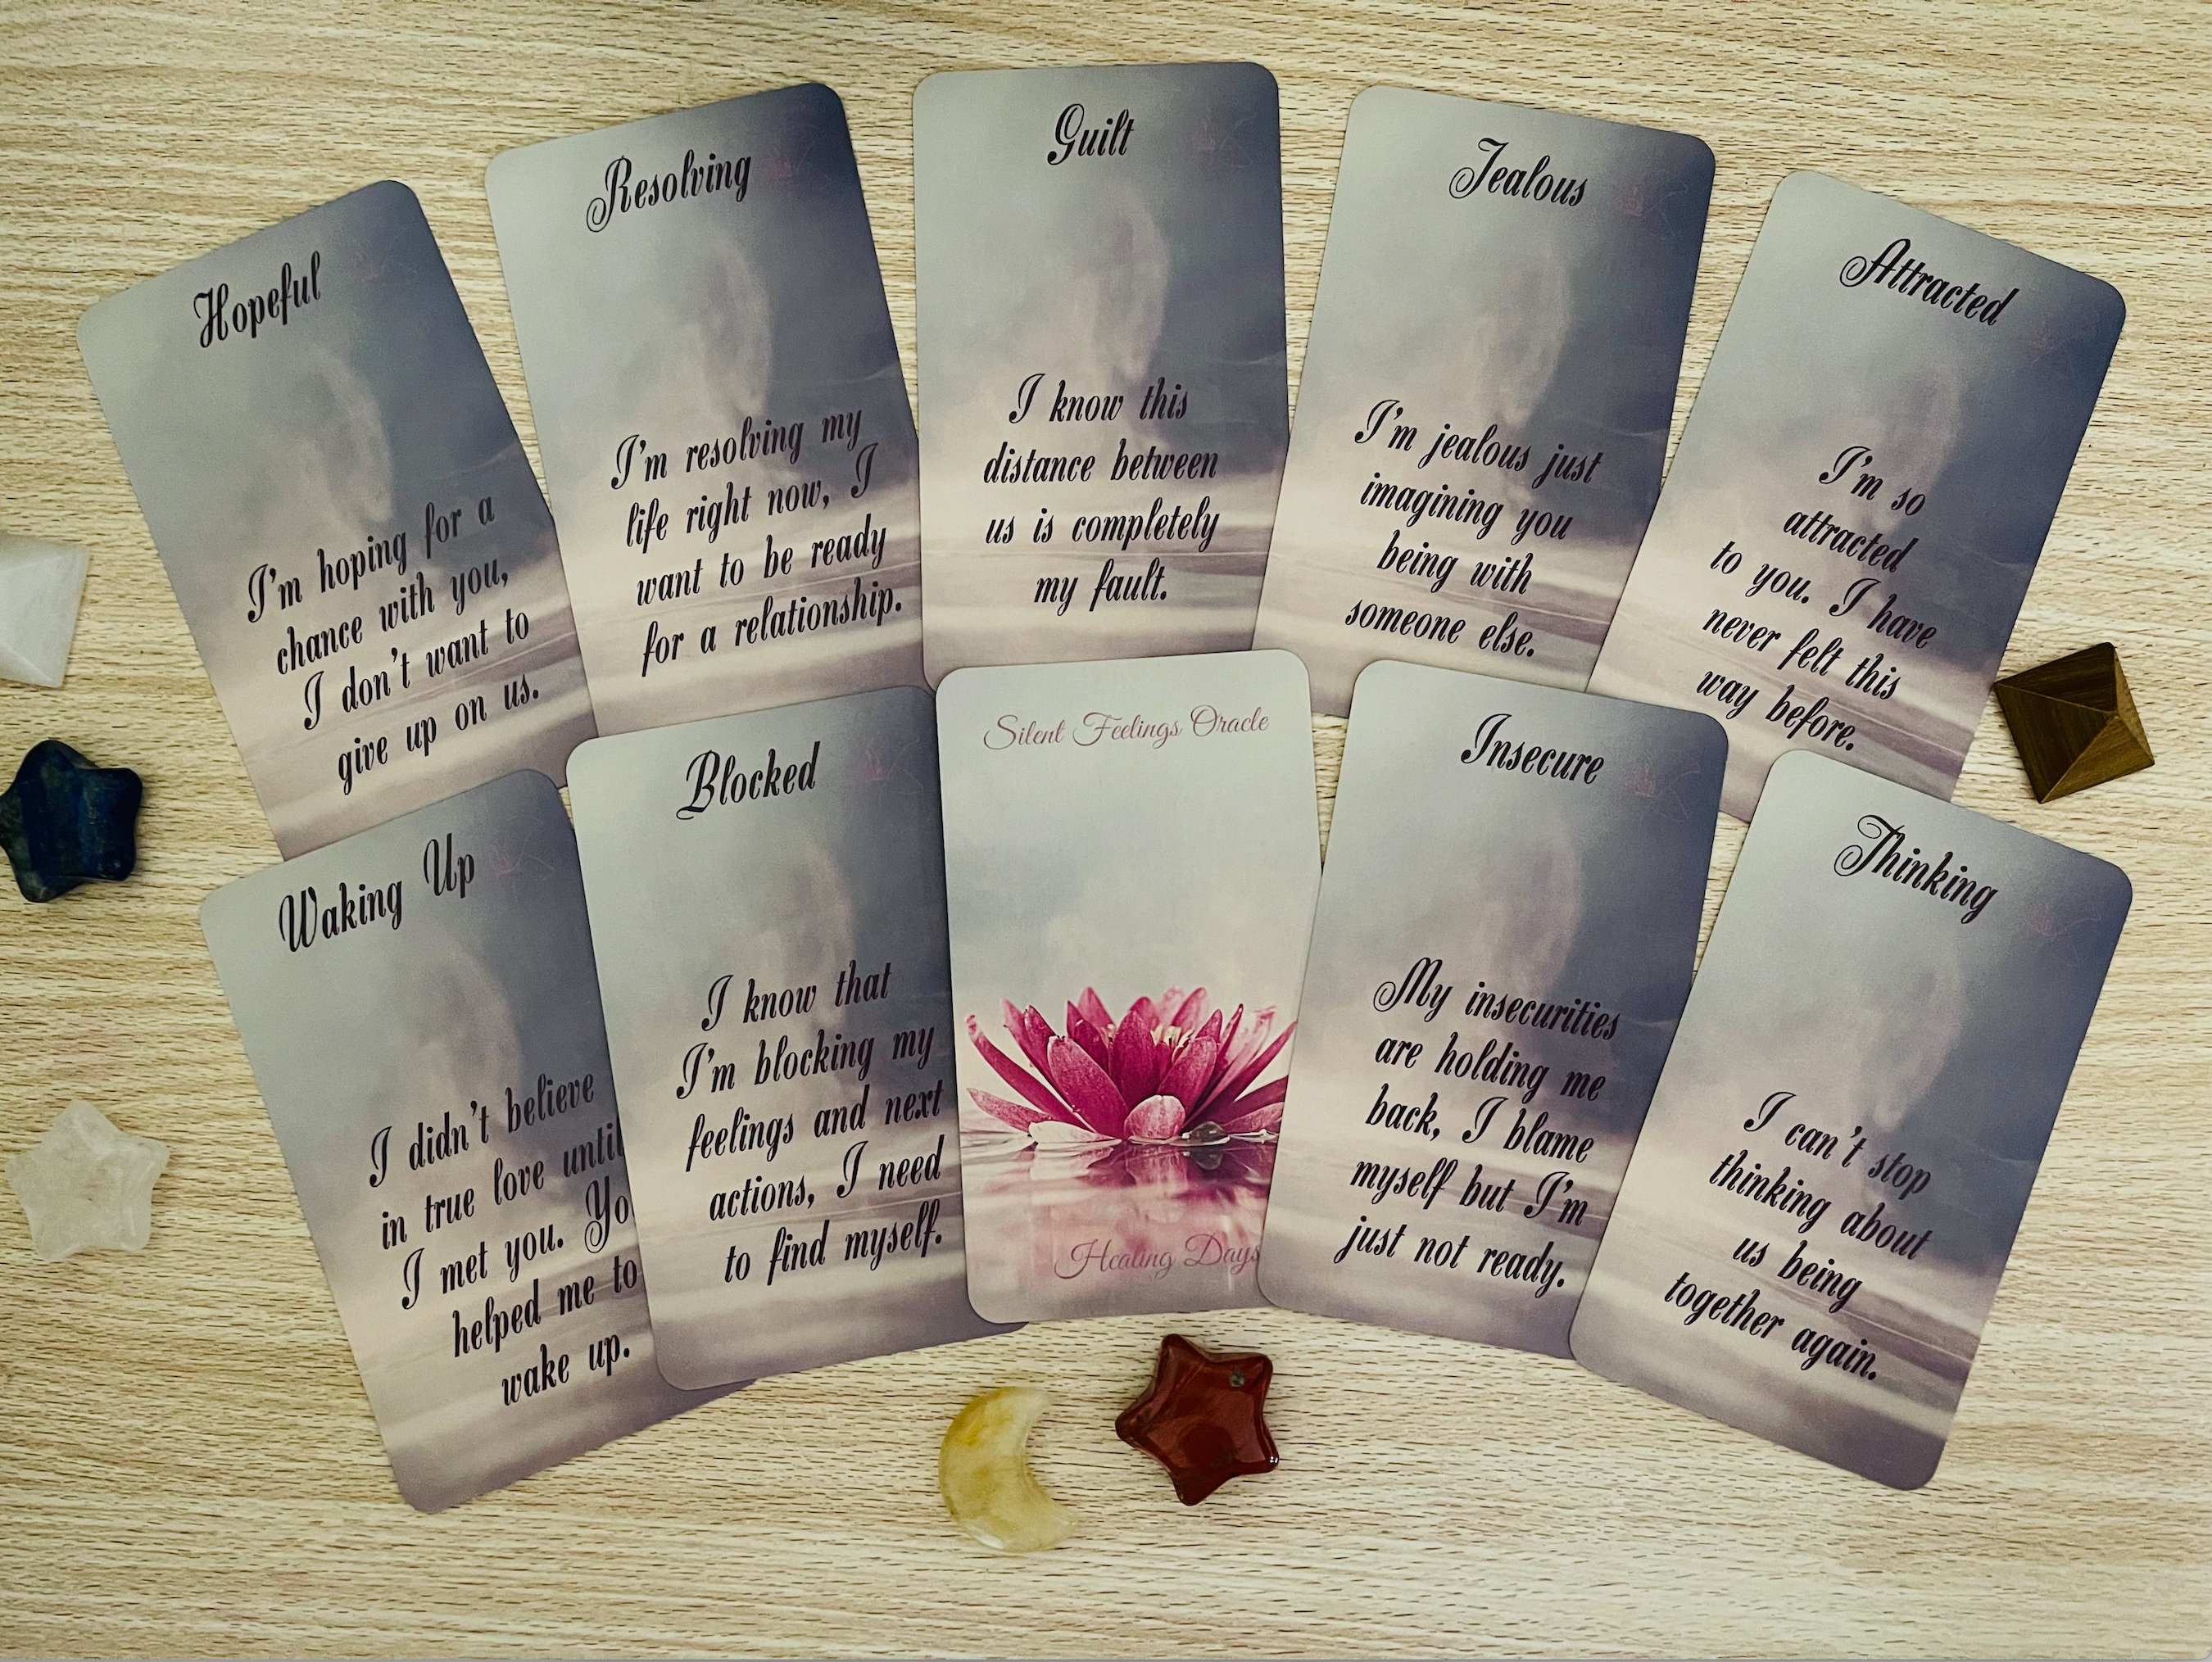 Silent Feelings Oracle. Love Messages Oracle Cards. Romance Oracle